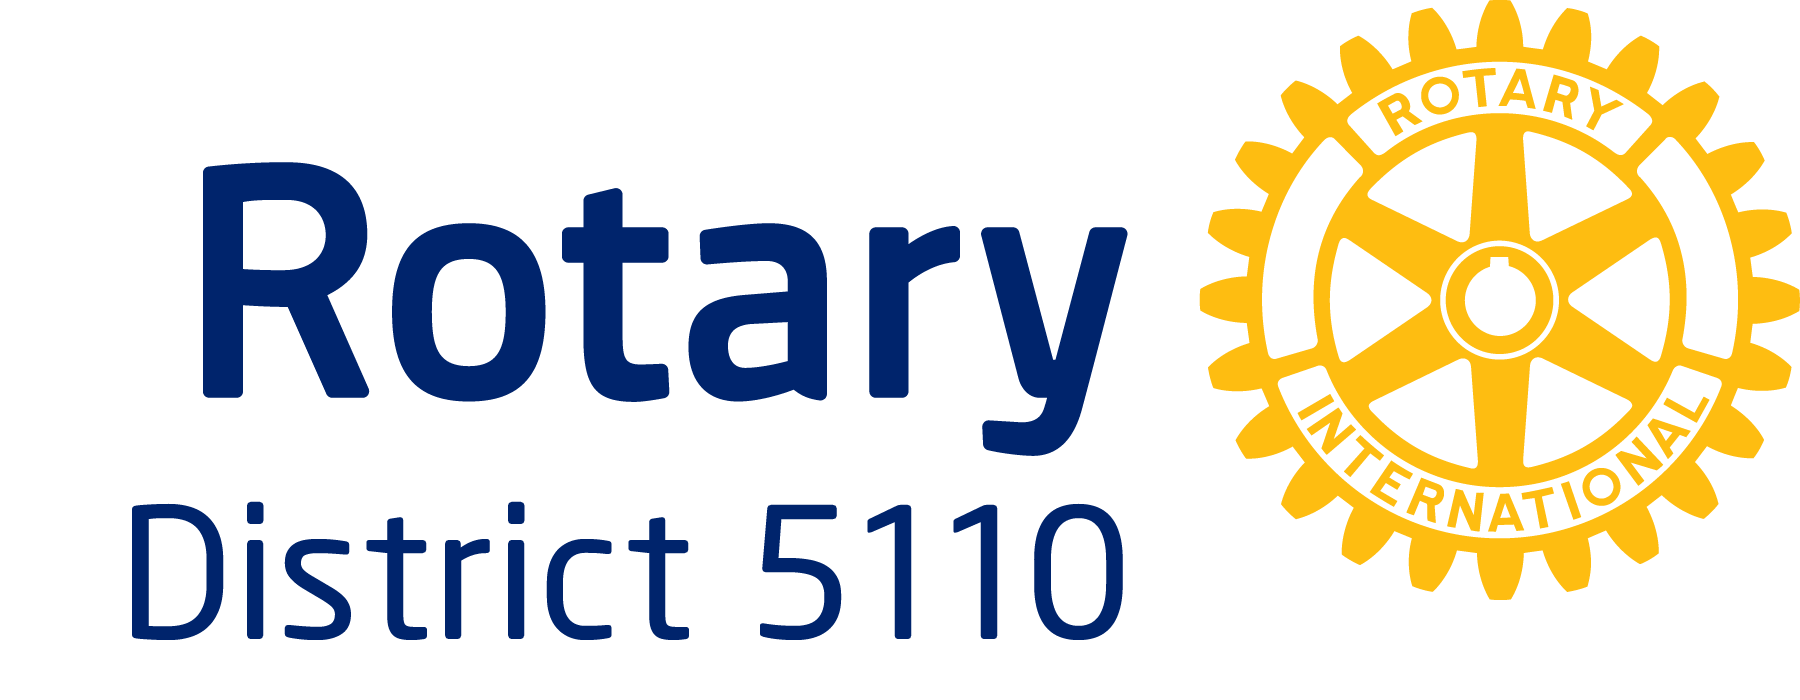 Rotary International District 5110 of Central, Southern Oregon and Northern California